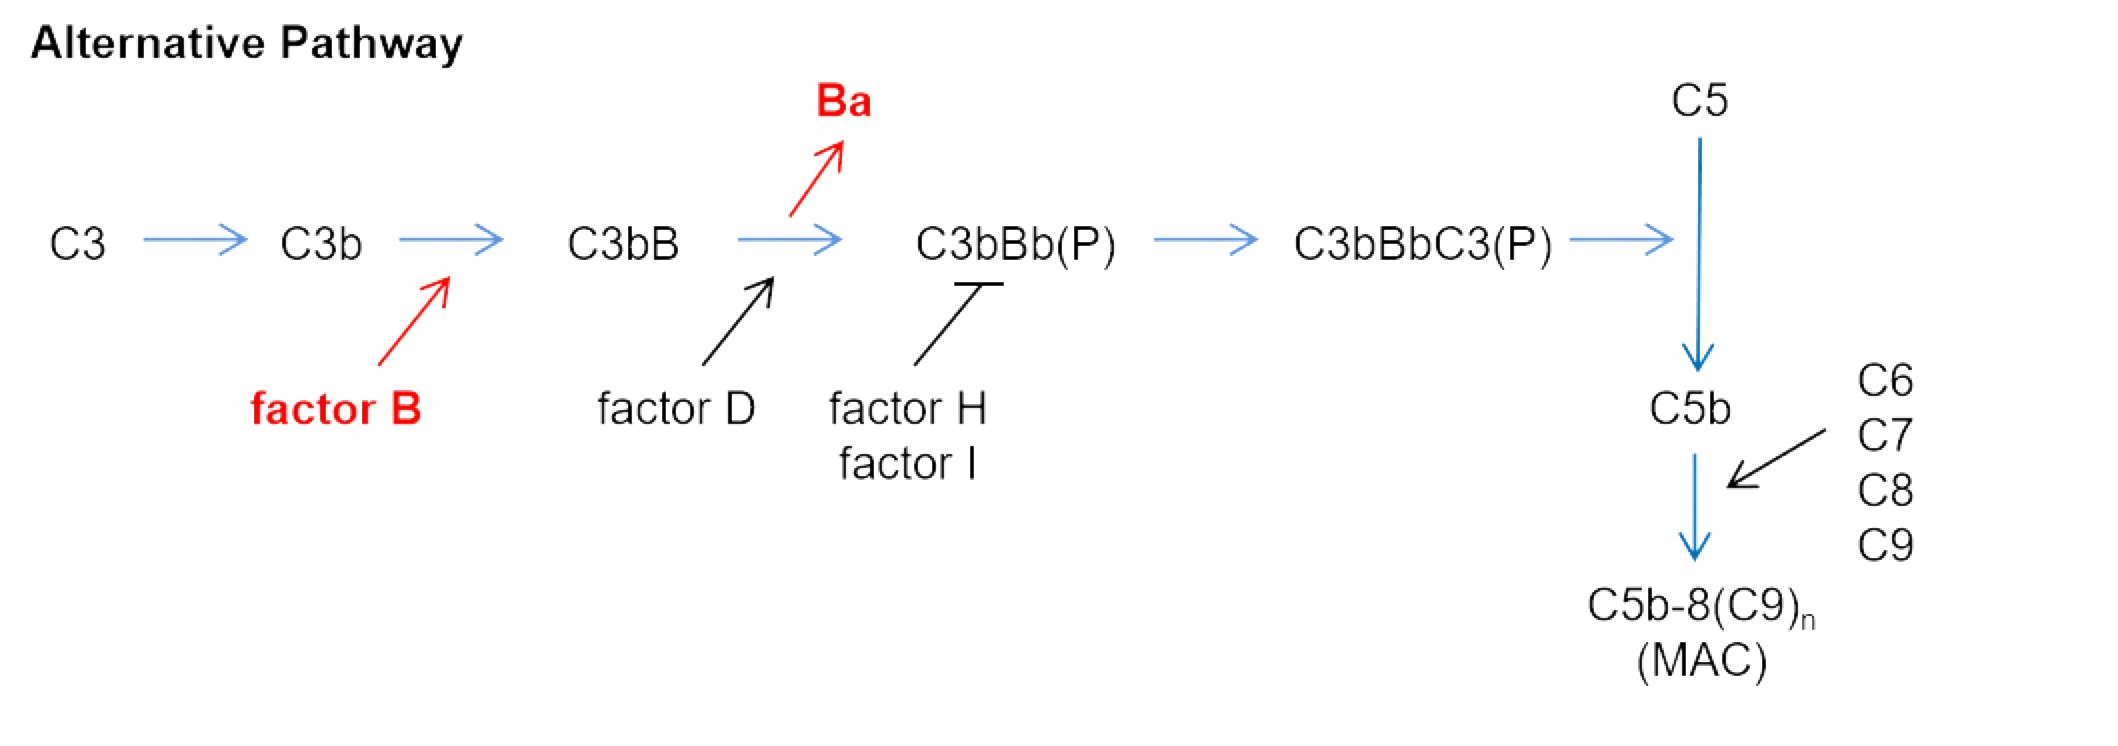 Activation of the alternative pathway of complement.